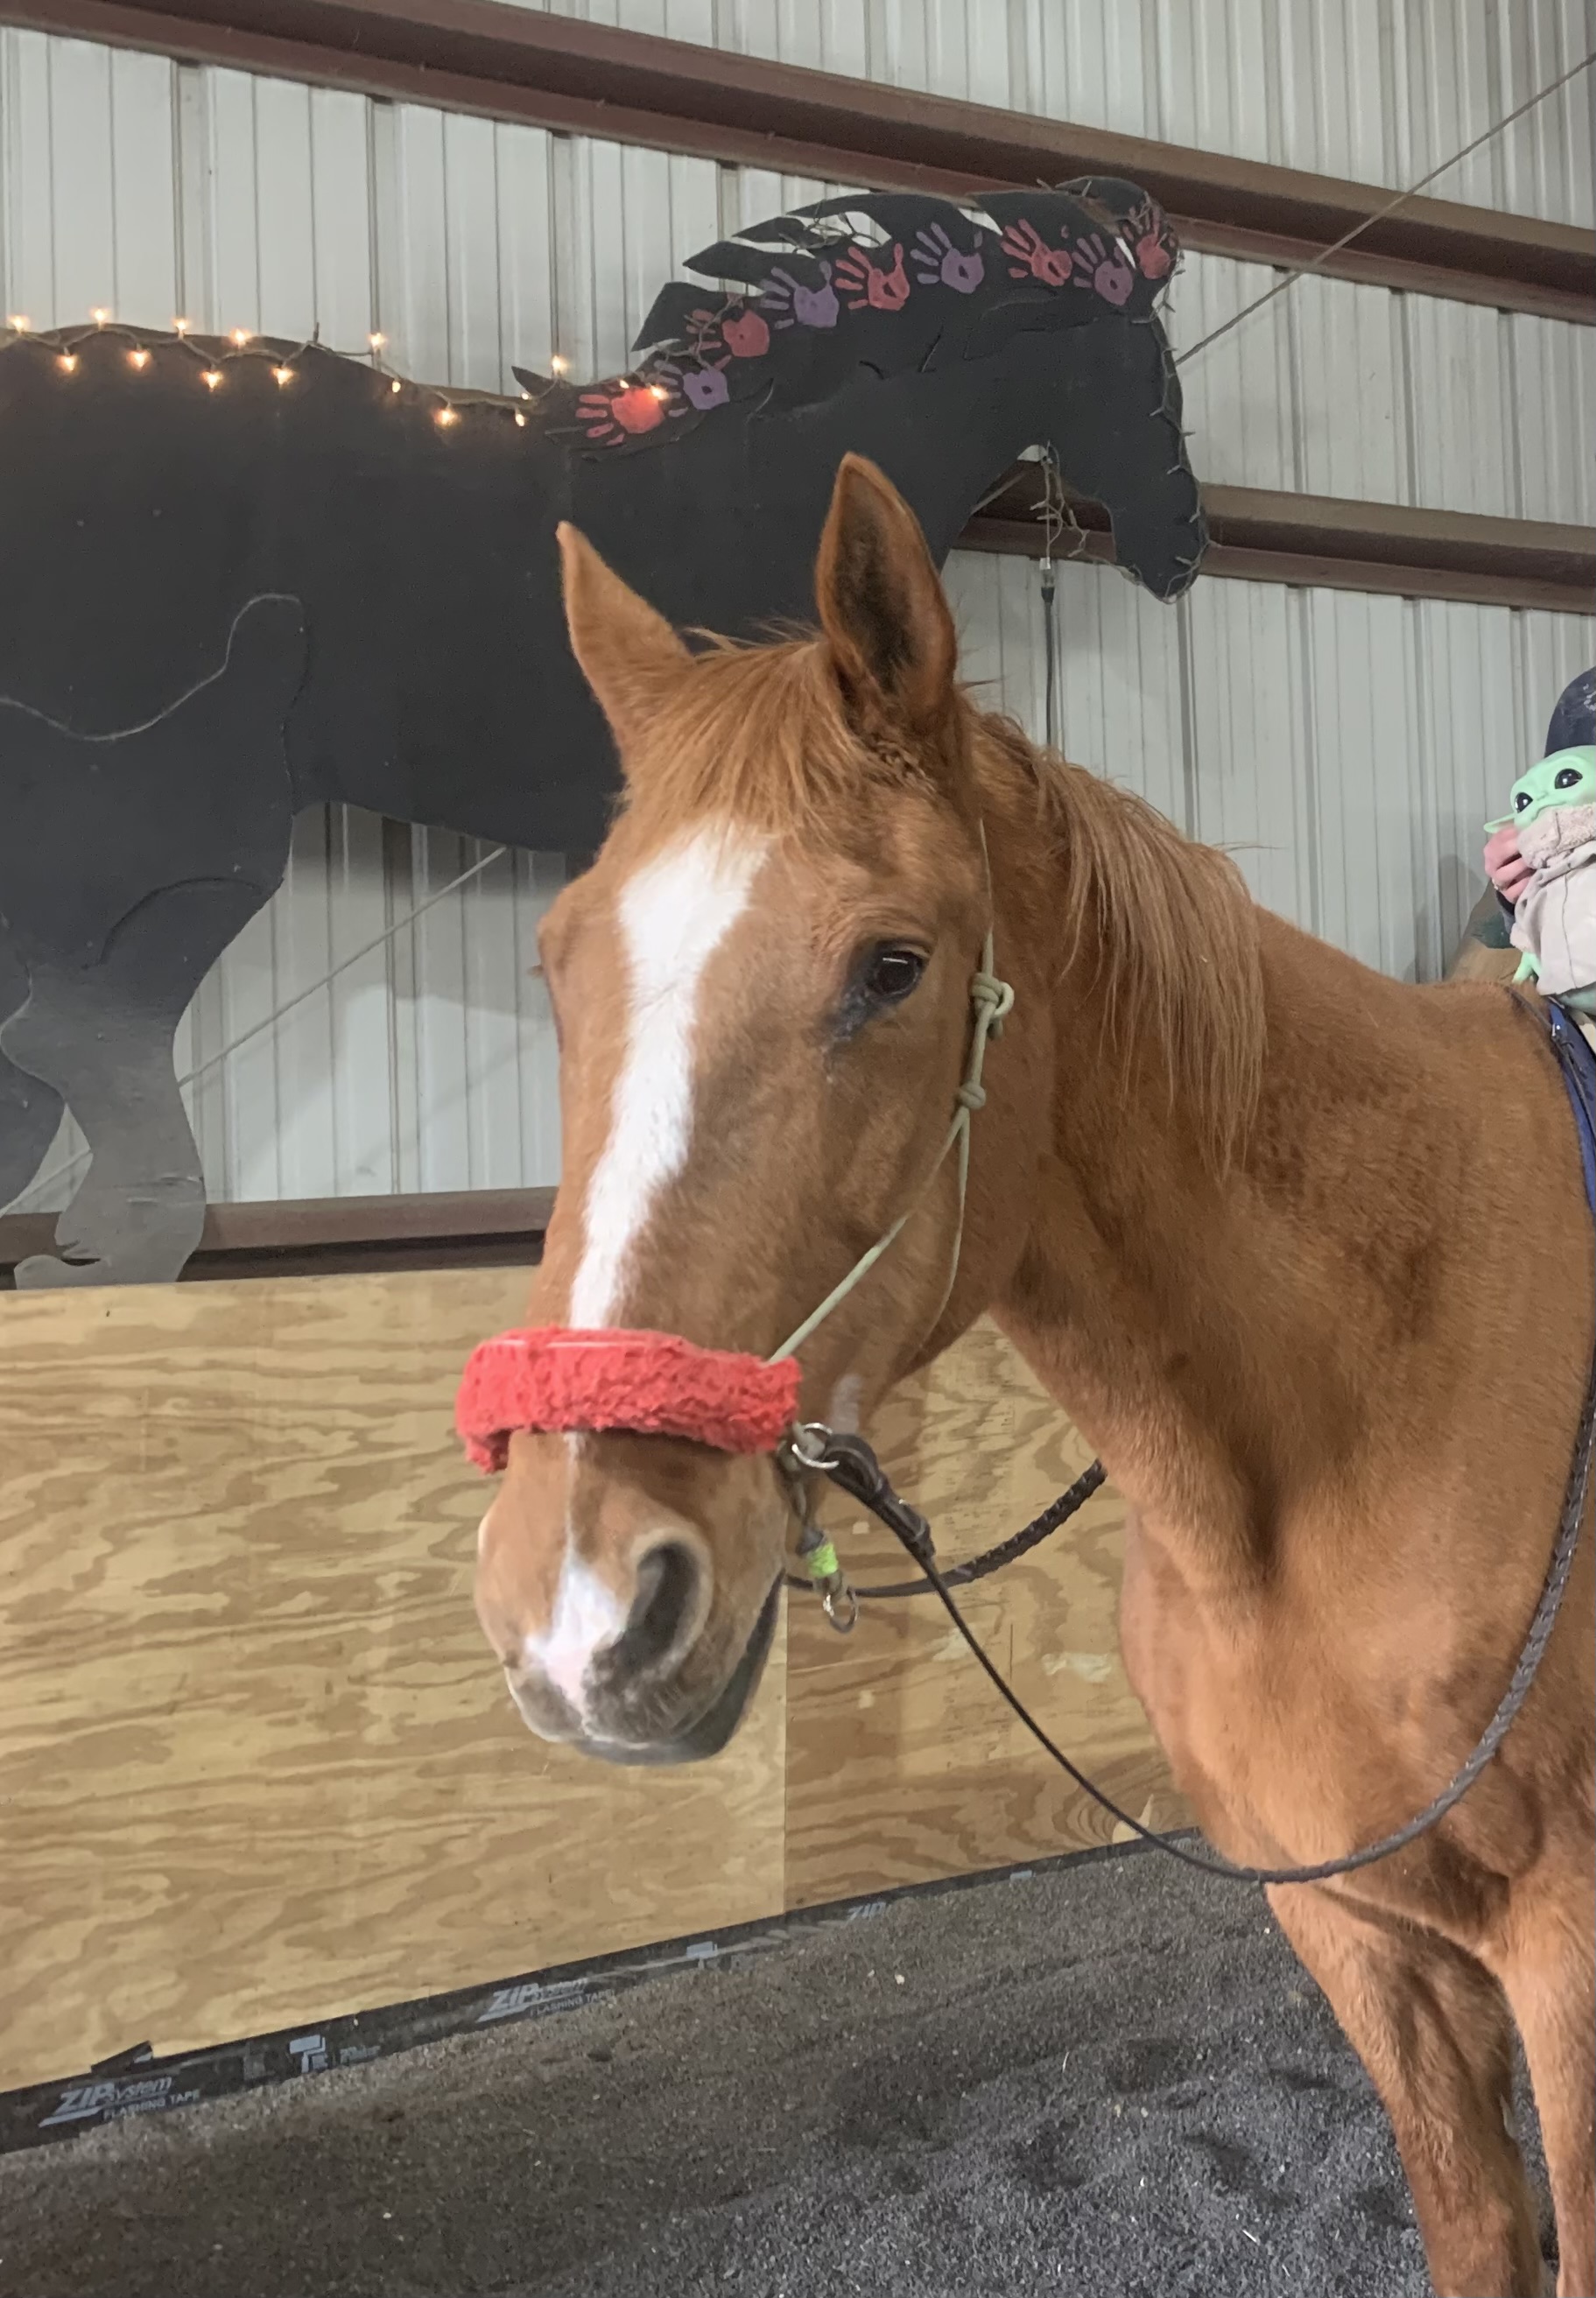 Wilbur the horse wearing bridle in riding arena